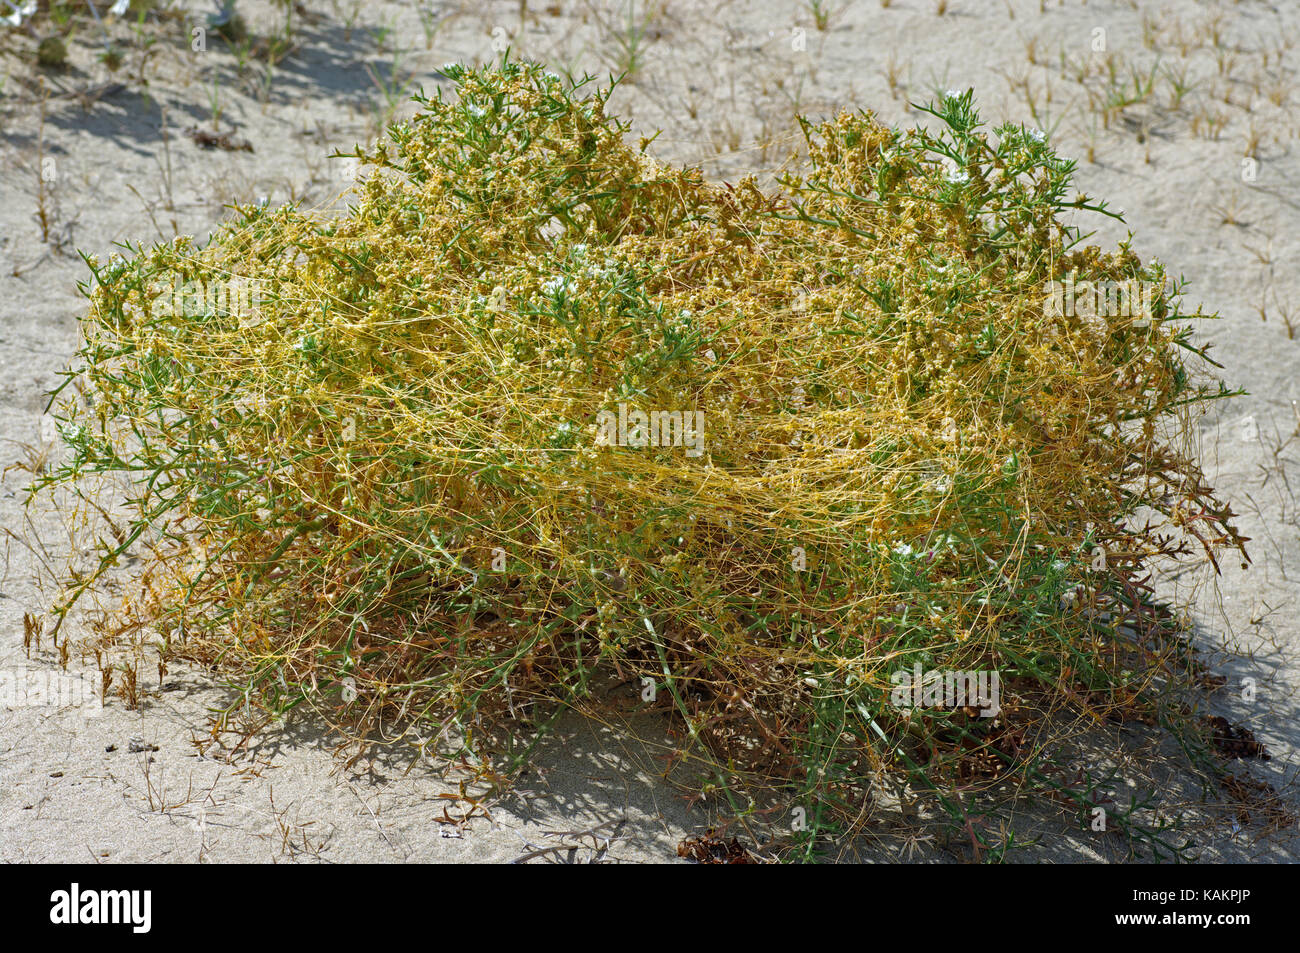 the parasitic plant Cuscuta scandens (Convolvulaceae) living on the plant Echinophora spinosa Stock Photo